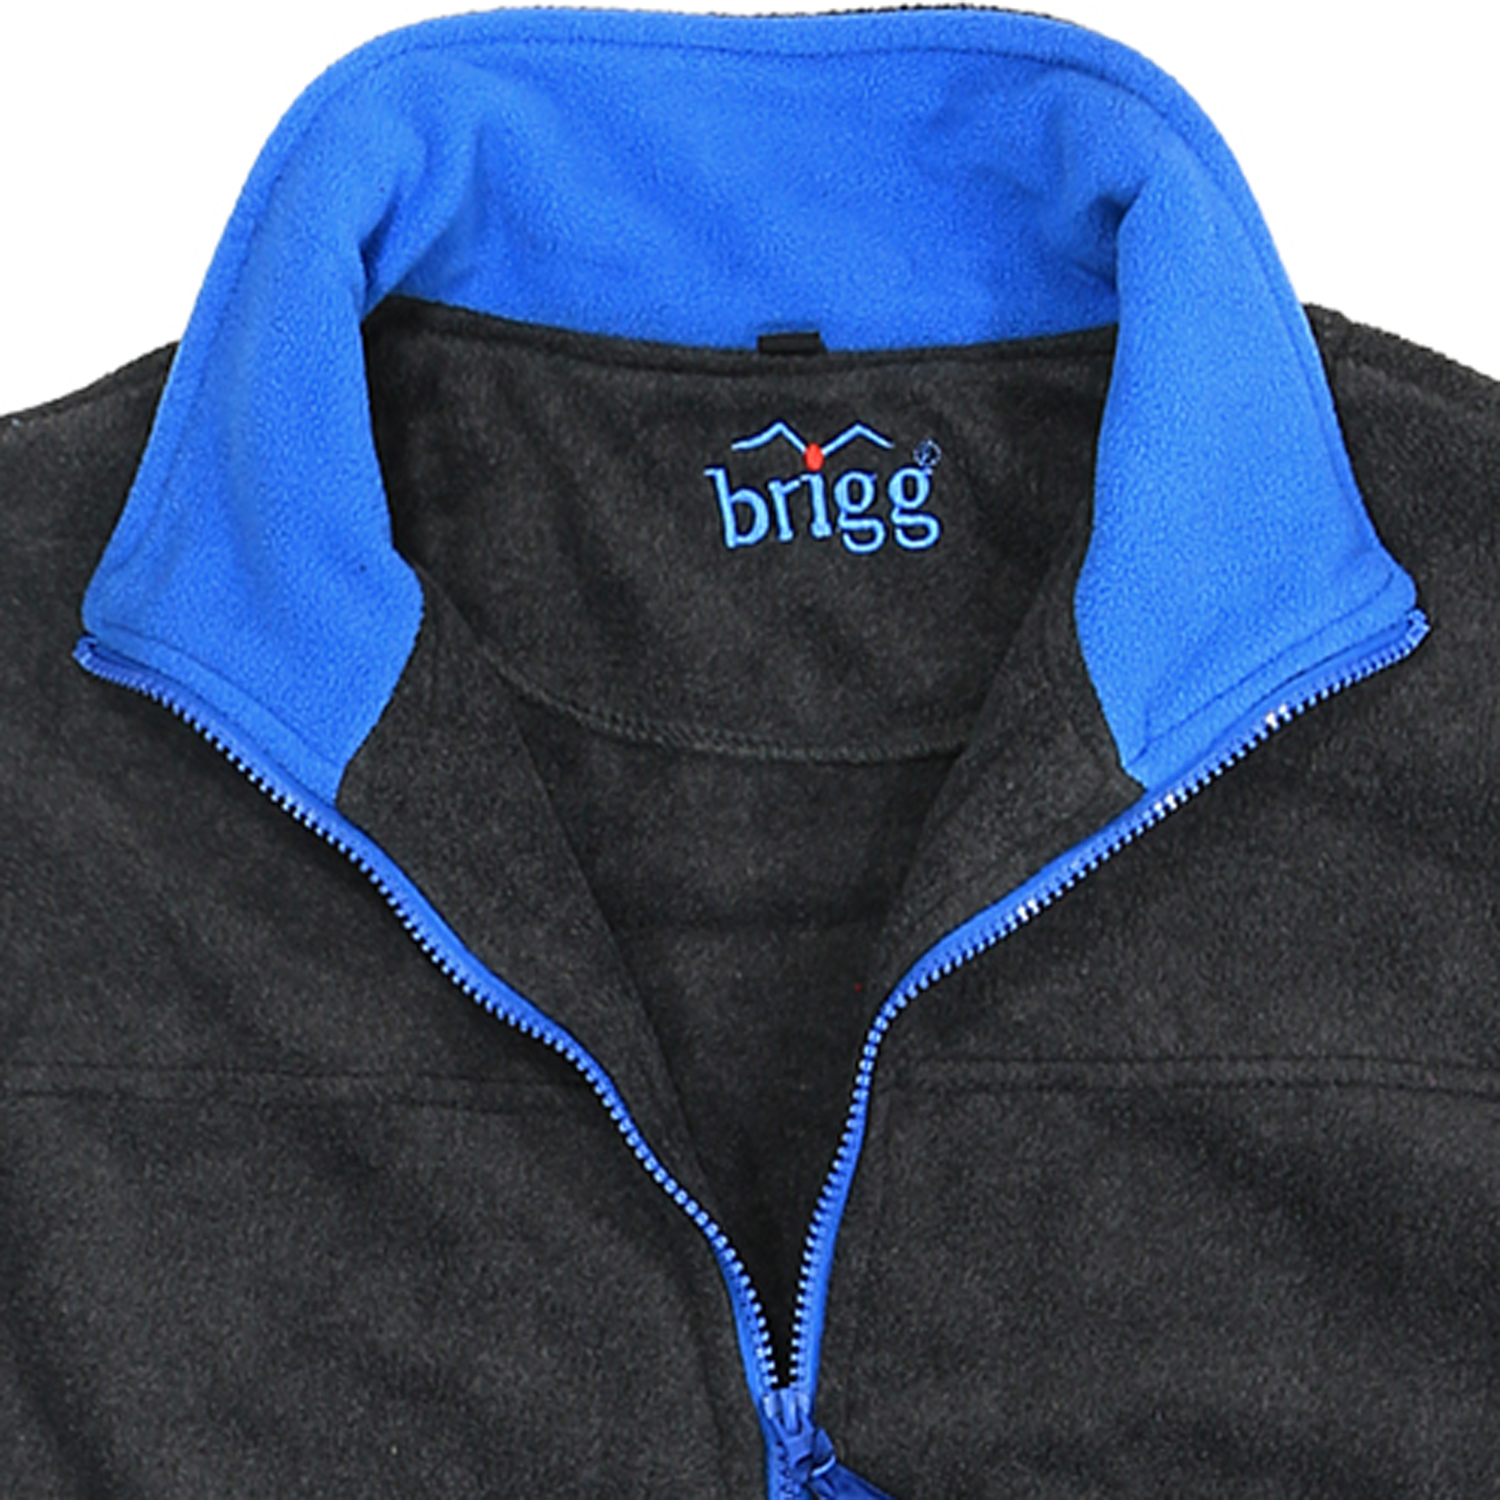 Fleece jacket in grey/blue by Brigg up to oversize 14XL